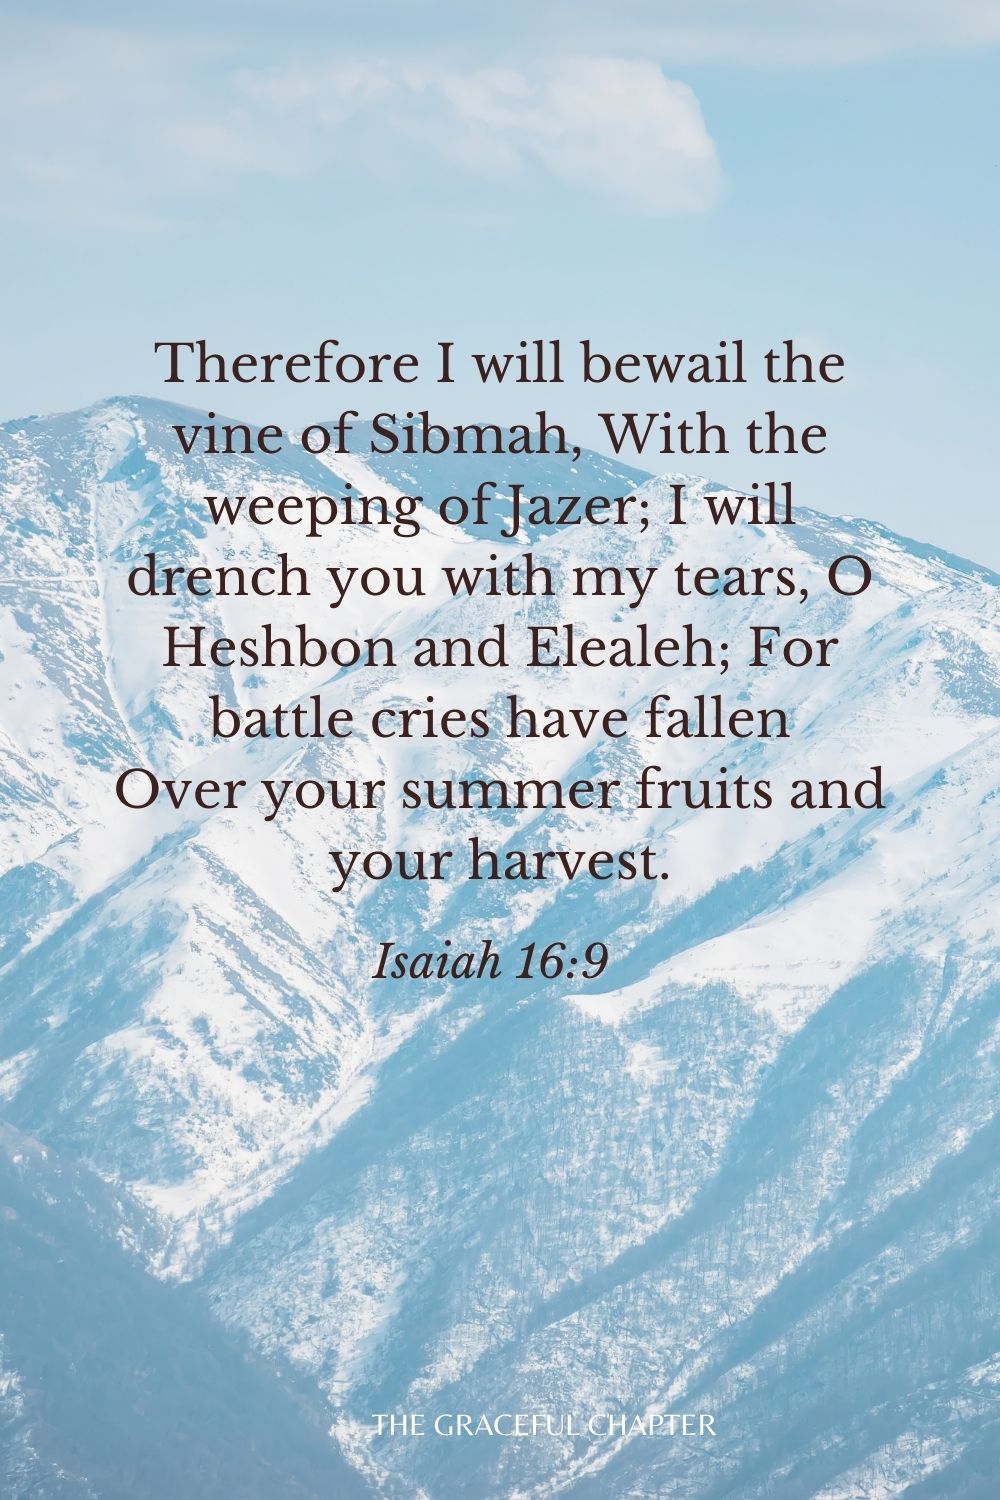 Therefore I will bewail the vine of Sibmah, With the weeping of Jazer; I will drench you with my tears, O Heshbon and Elealeh; For battle cries have fallen Over your summer fruits and your harvest. Isaiah 16:9